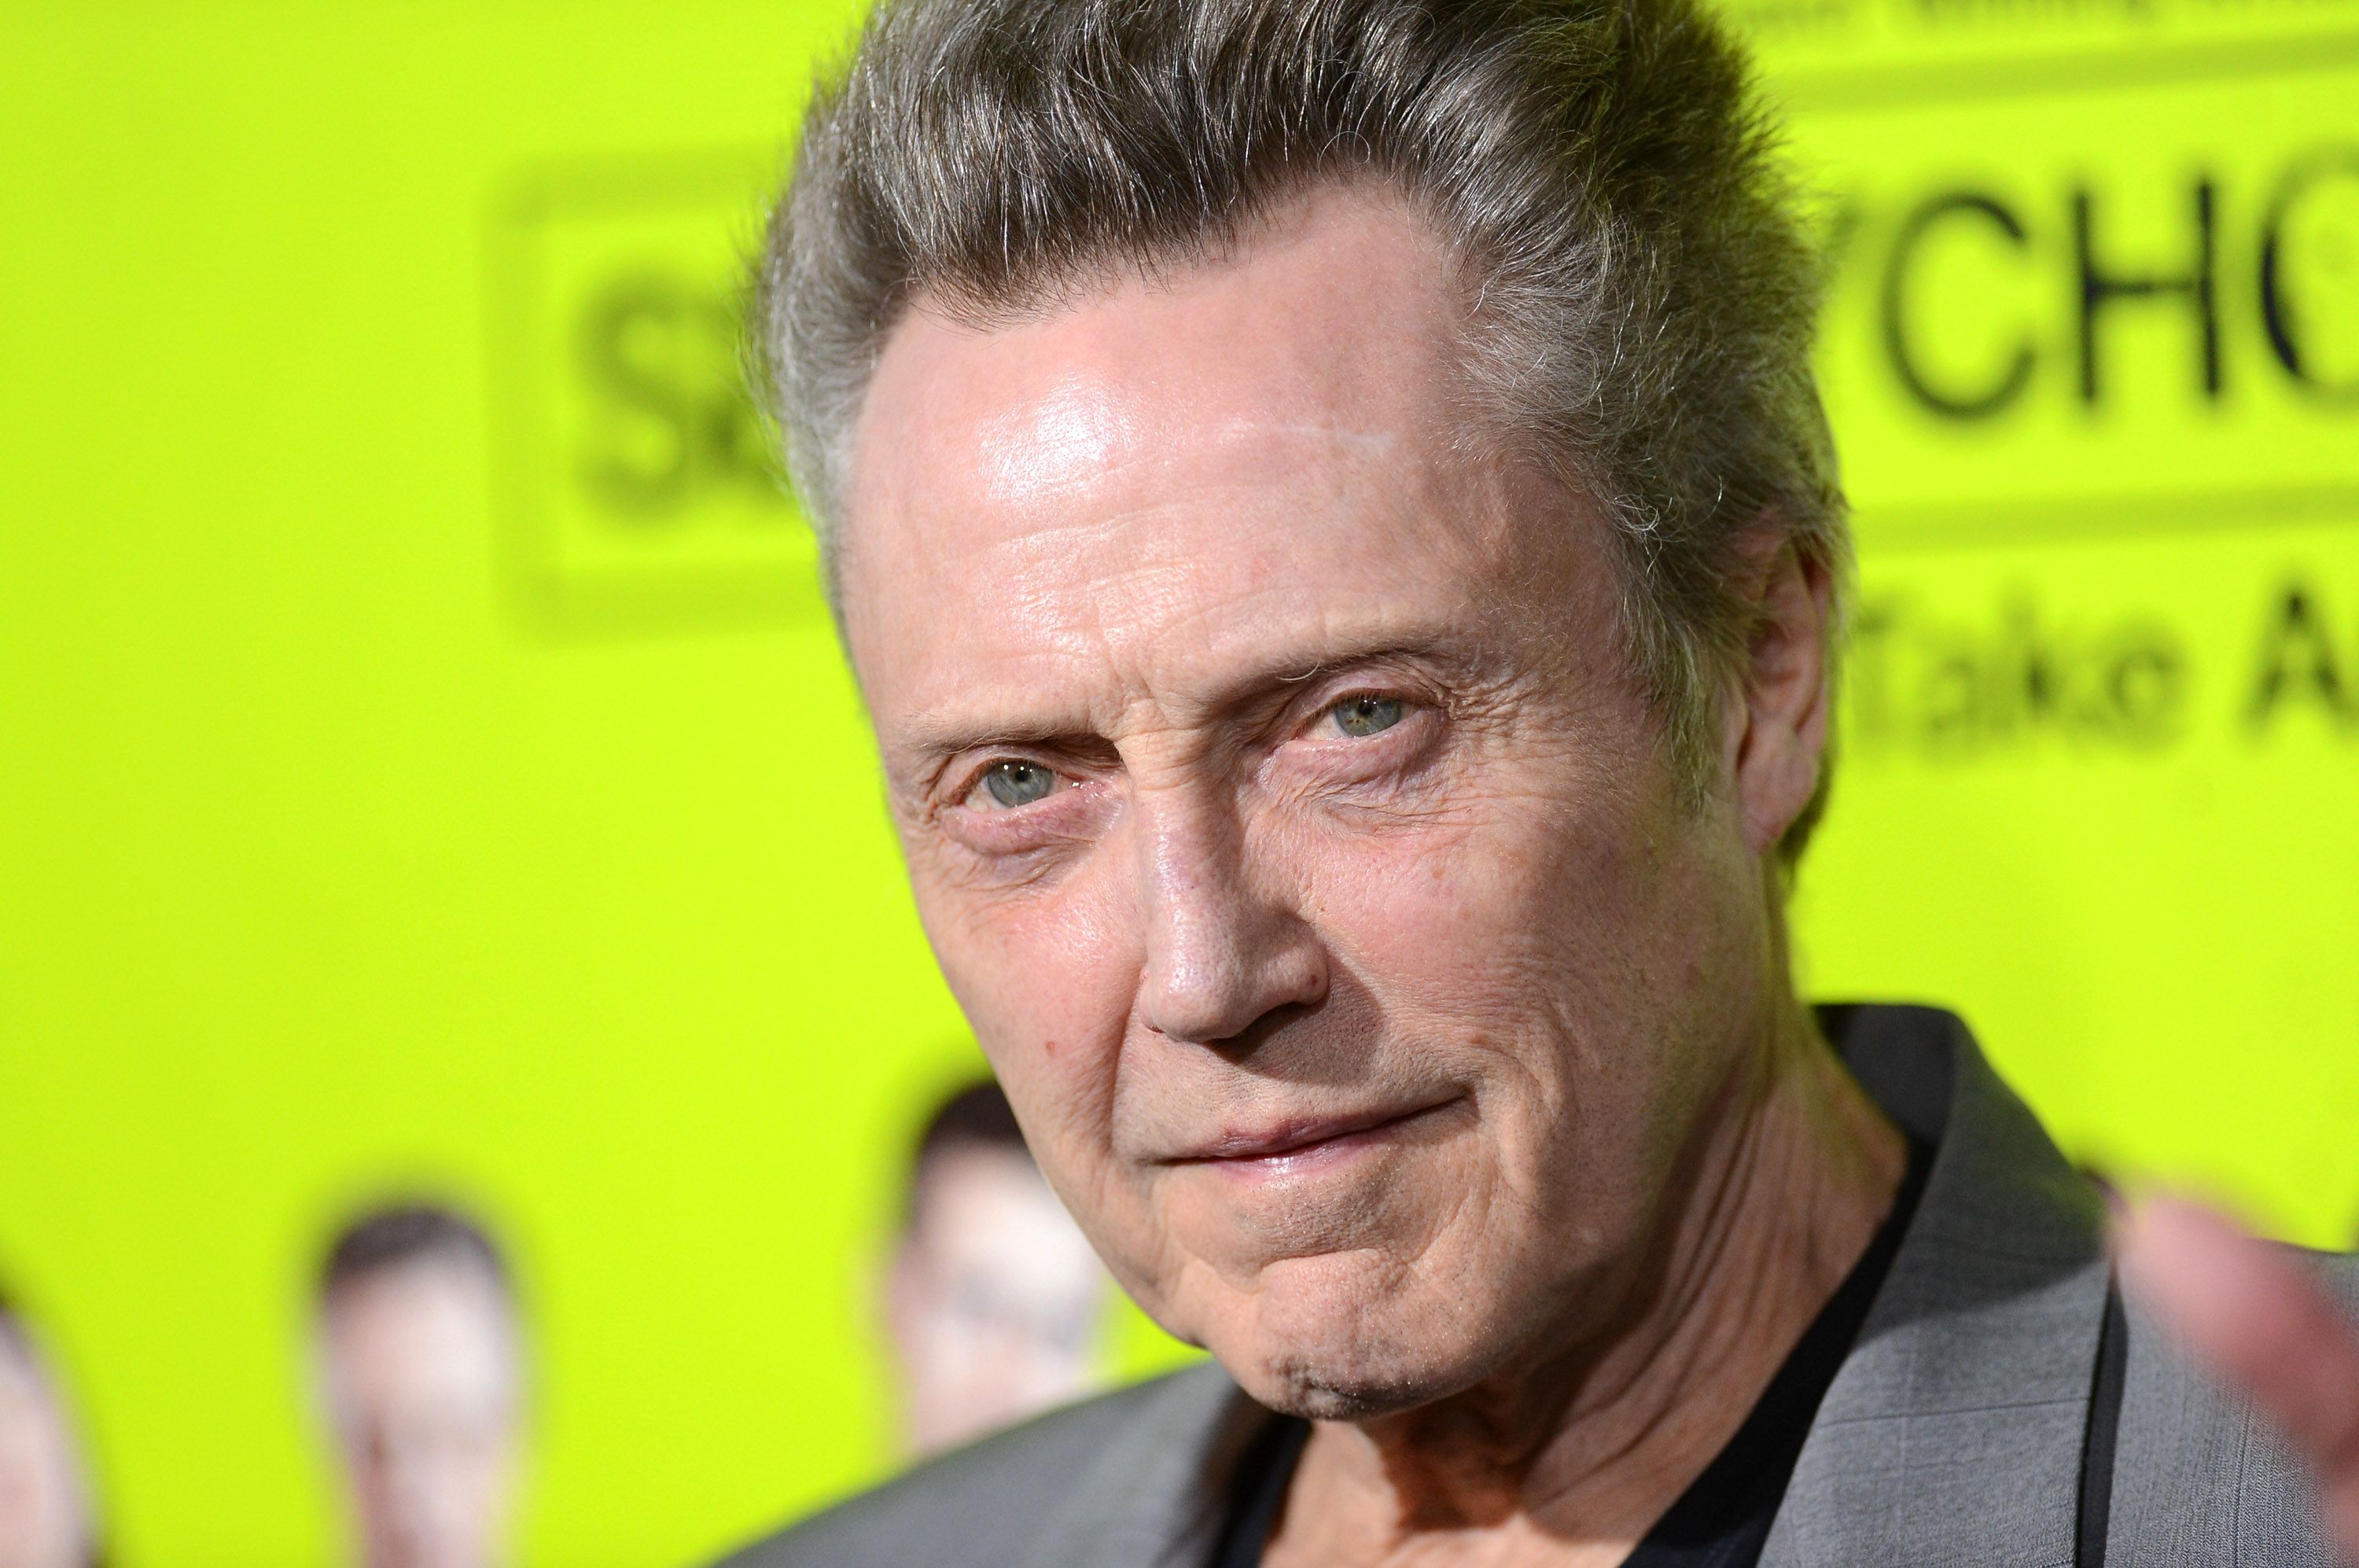 Christopher Walken at the premiere of "Seven Psychopaths" on October 1, 2012, in Westwood, California. | Source: Jason Merritt/Getty Images